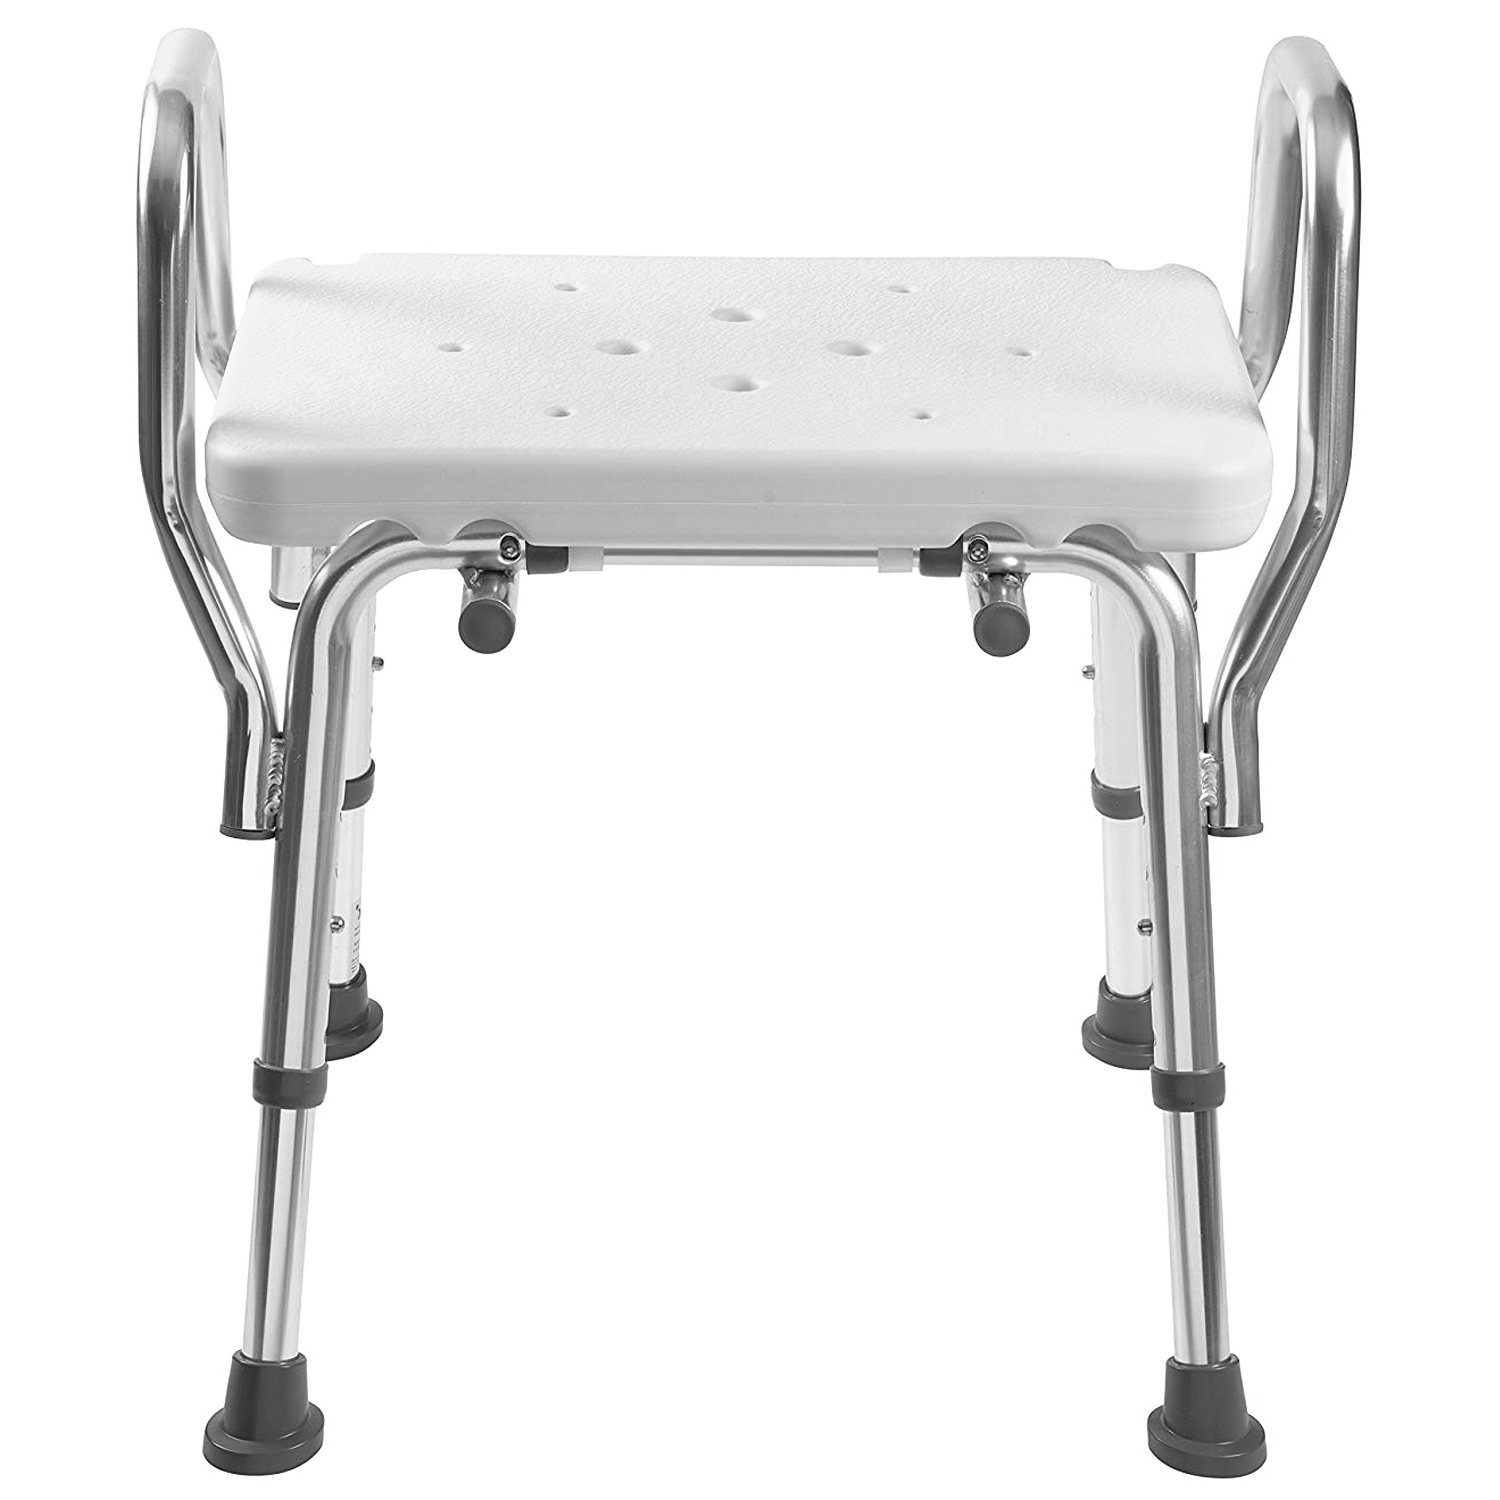 DMI Shower Chair, 16-20"H, 19 x 13 Seat, 350 lb Capacity - image 5 of 7